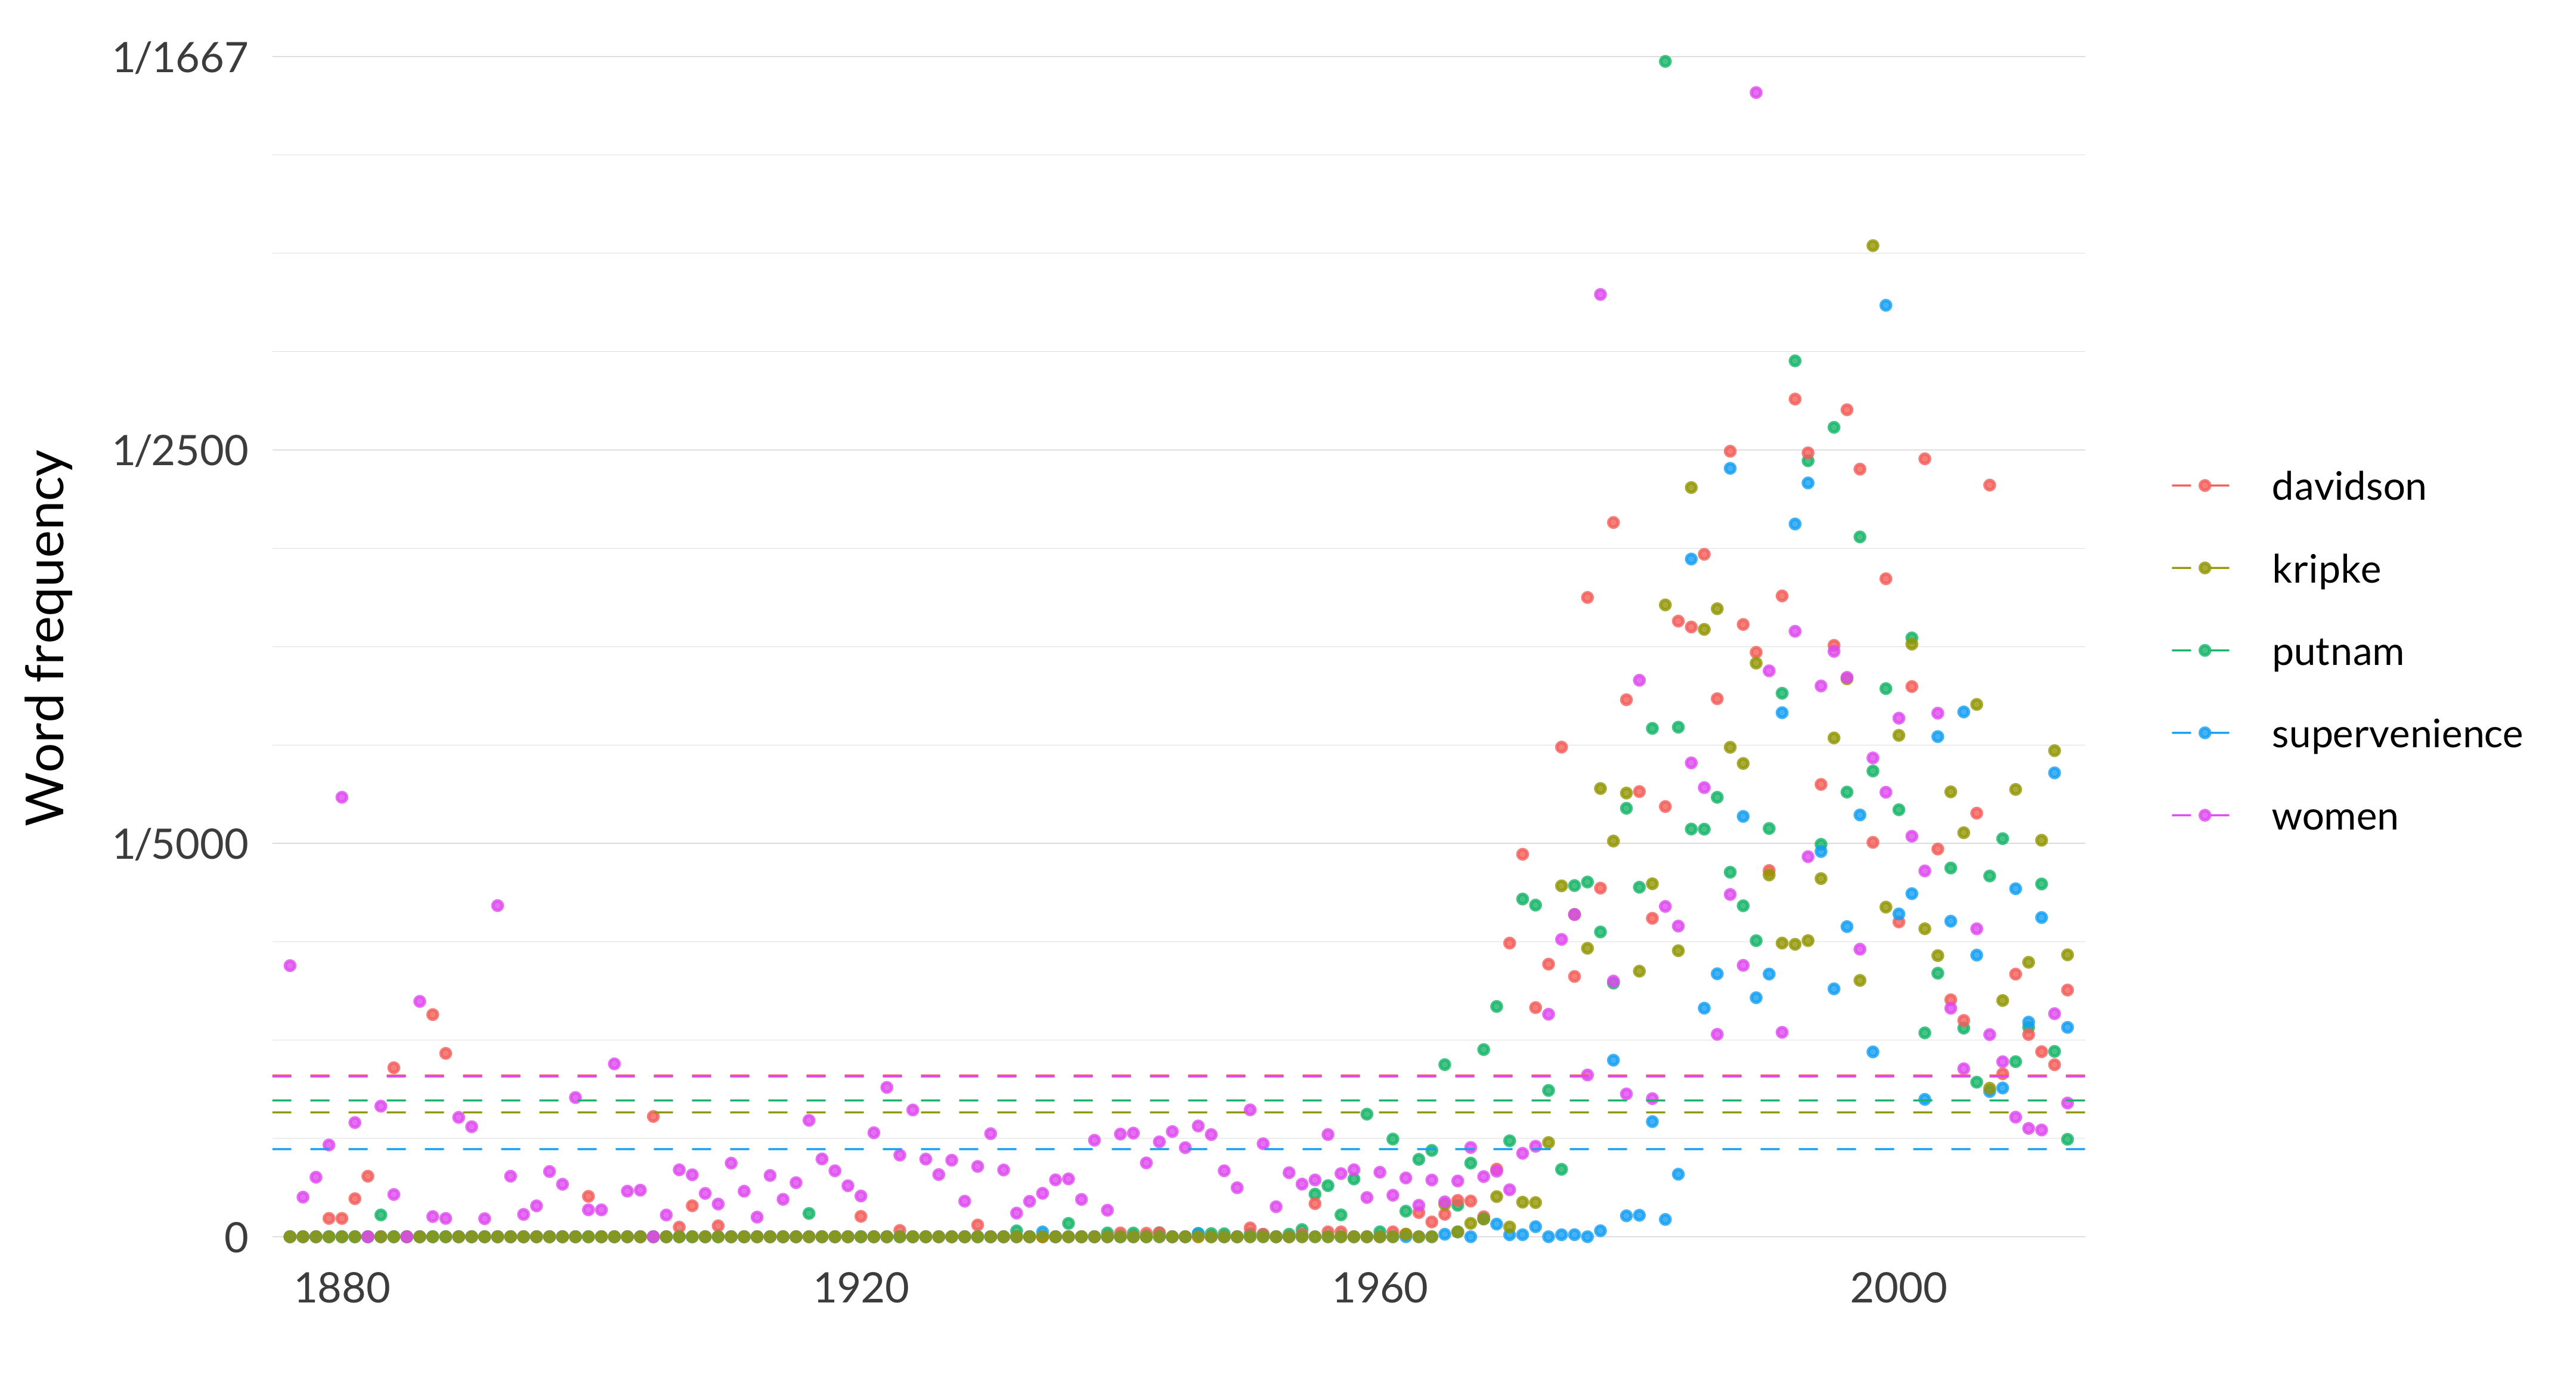 A scatterplot showing the frequency of the words putnam, davidson, supervenience, kripke, women. The word putnam appears, on average across the years, 69 times per million words, and in the median year, it appears 2 times per million words. Its most frequent occurrence is in 1982 when it appears 598 times per million words, and its least frequent occurrence is in 1876 when it appears 0 times per million words. The word davidson appears, on average across the years, 82 times per million words, and in the median year, it appears 2 times per million words. Its most frequent occurrence is in 1992 when it appears 426 times per million words, and its least frequent occurrence is in 1876 when it appears 0 times per million words. The word supervenience appears, on average across the years, 45 times per million words, and in the median year, it appears 0 times per million words. Its most frequent occurrence is in 1999 when it appears 474 times per million words, and its least frequent occurrence is in 1876 when it appears 0 times per million words. The word kripke appears, on average across the years, 63 times per million words, and in the median year, it appears 0 times per million words. Its most frequent occurrence is in 1998 when it appears 504 times per million words, and its least frequent occurrence is in 1876 when it appears 0 times per million words. The word women appears, on average across the years, 81 times per million words, and in the median year, it appears 45 times per million words. Its most frequent occurrence is in 1989 when it appears 582 times per million words, and its least frequent occurrence is in 1882 when it appears 0 times per million words. 